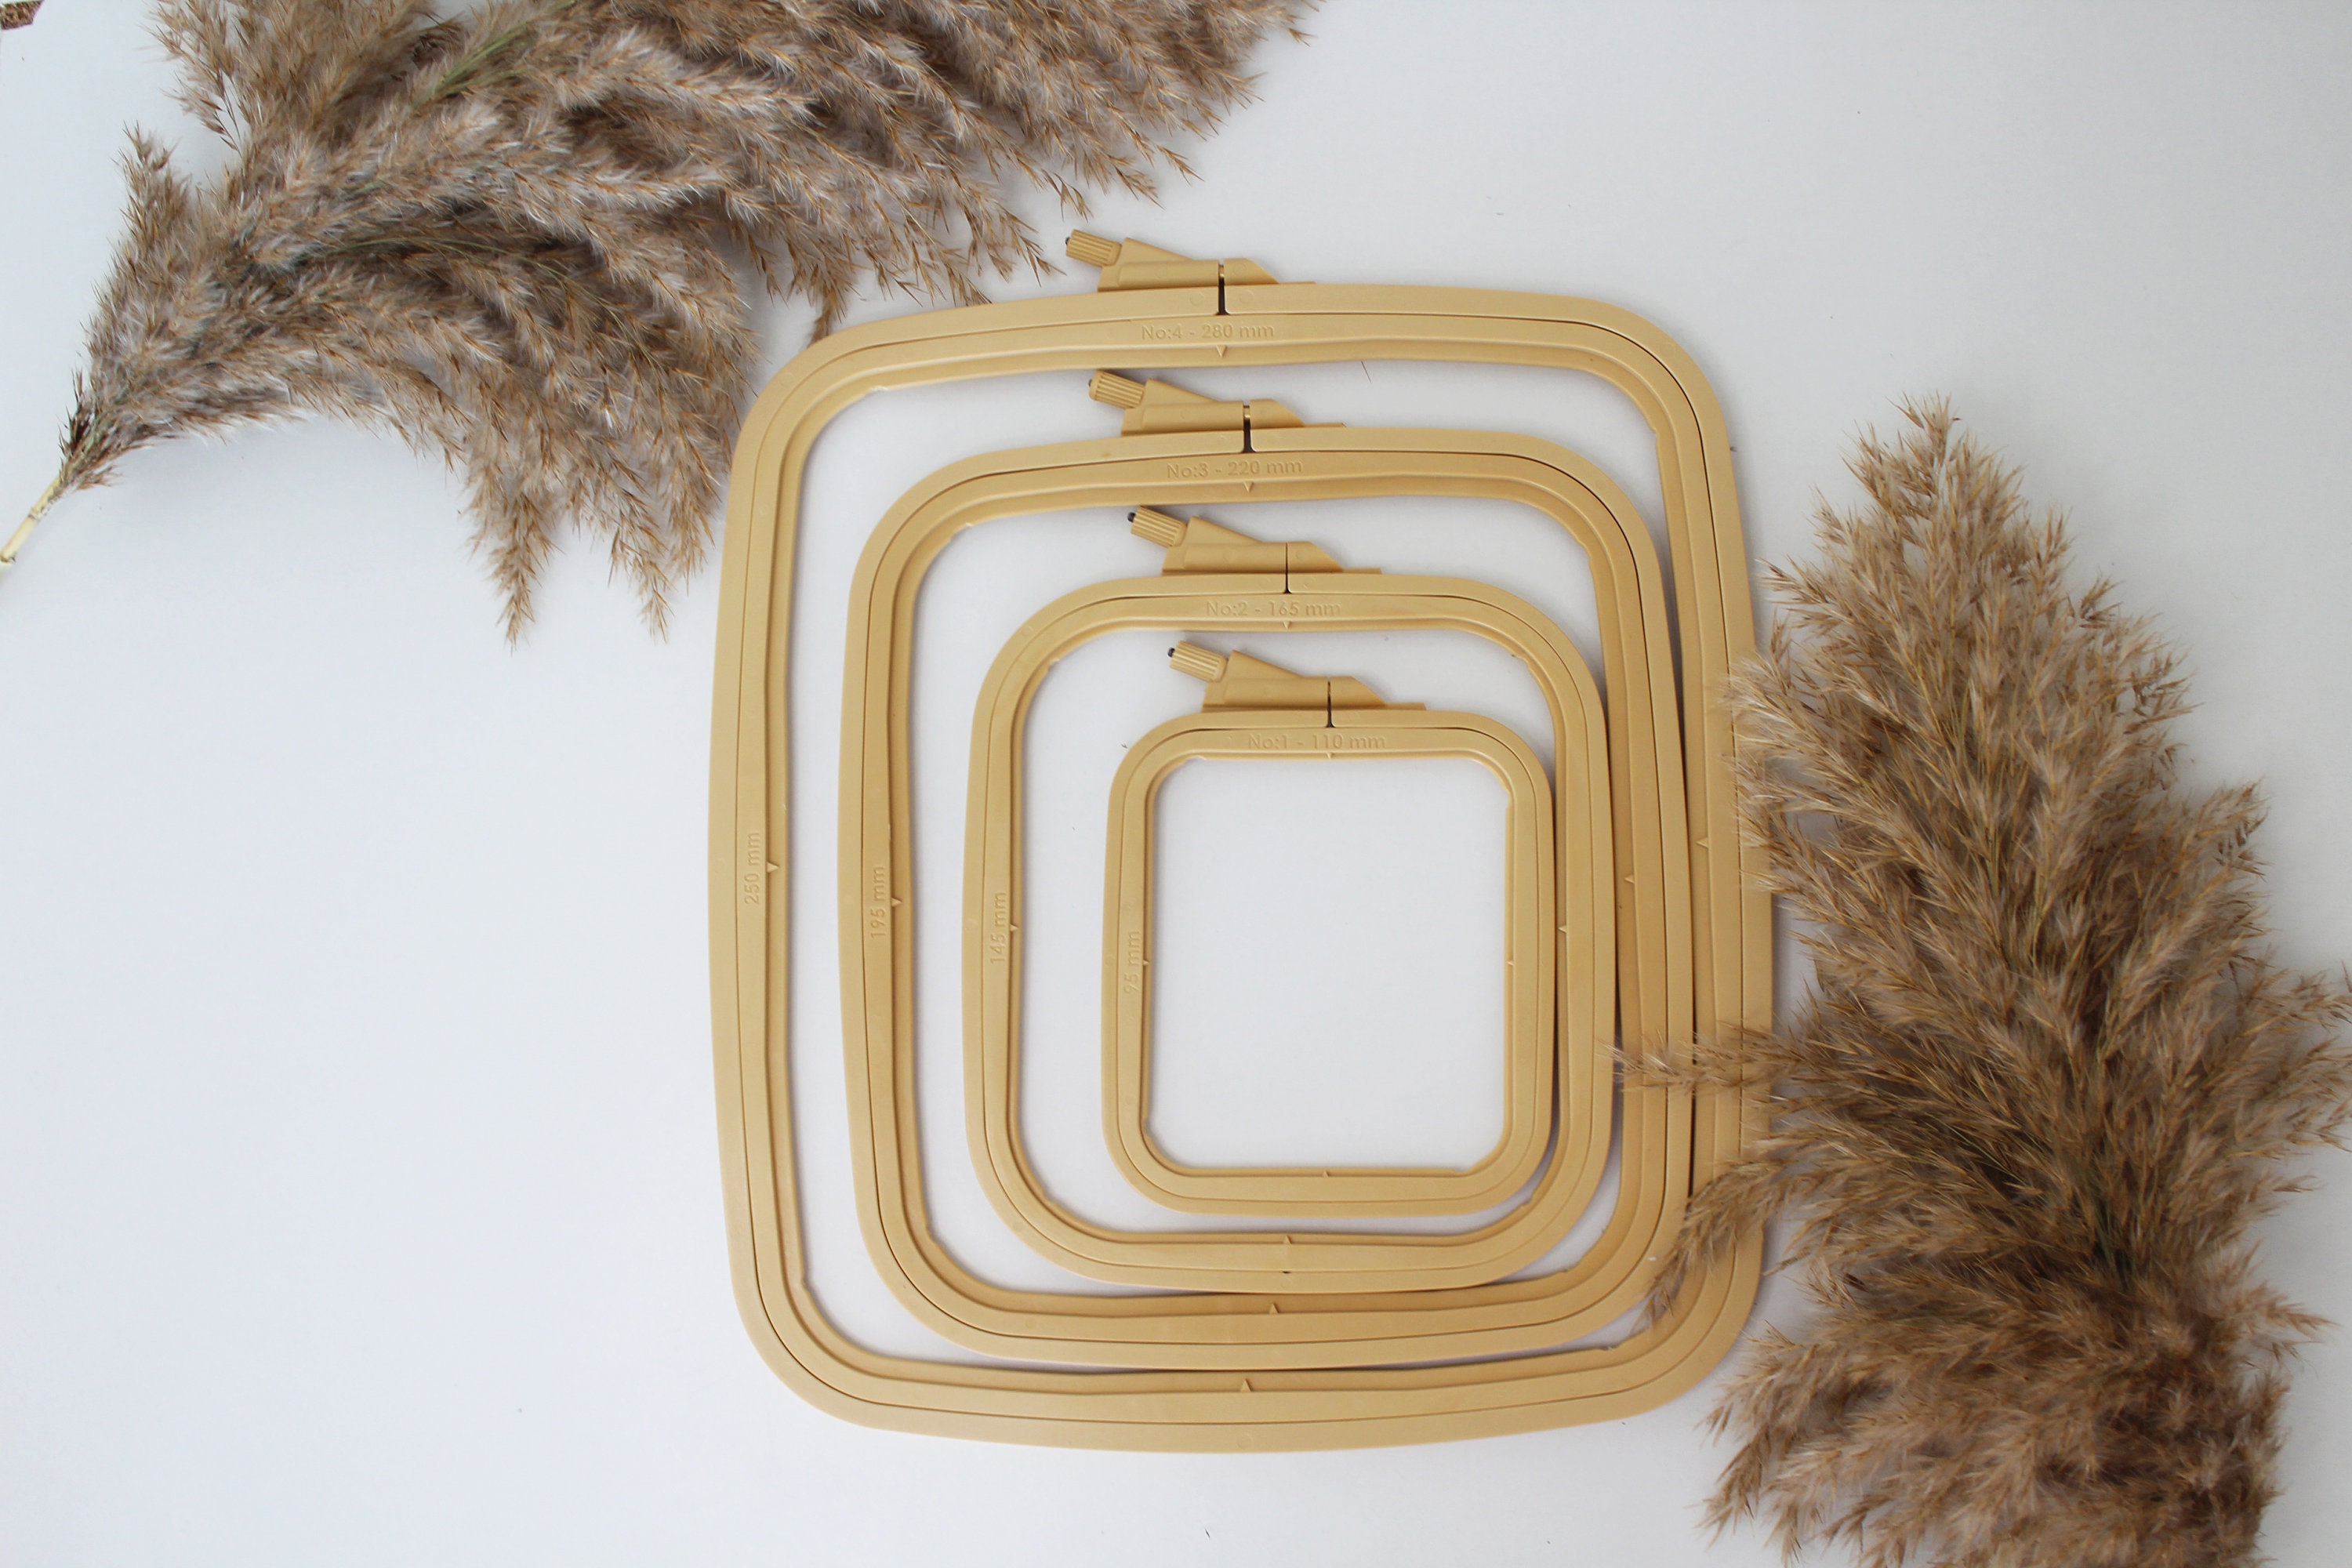 Square Nurge Embroidery Hoop Frame, Plastic Hoop for Embroidery